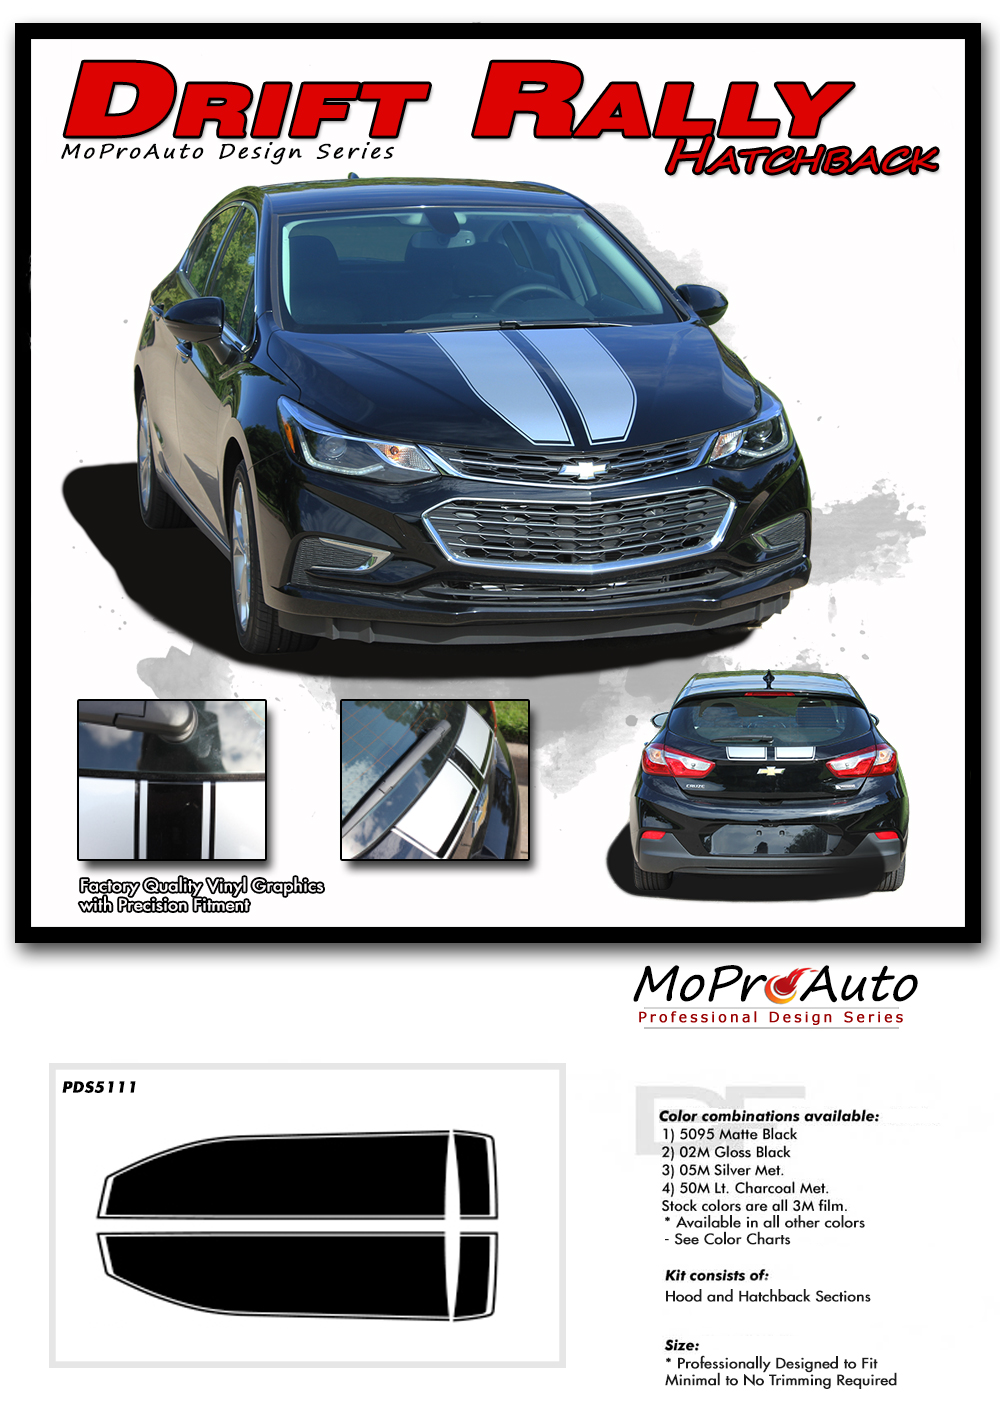 Chevy Cruze Hatchback RALLY STRIPES Vinyl Graphics, Stripes and Decals Set